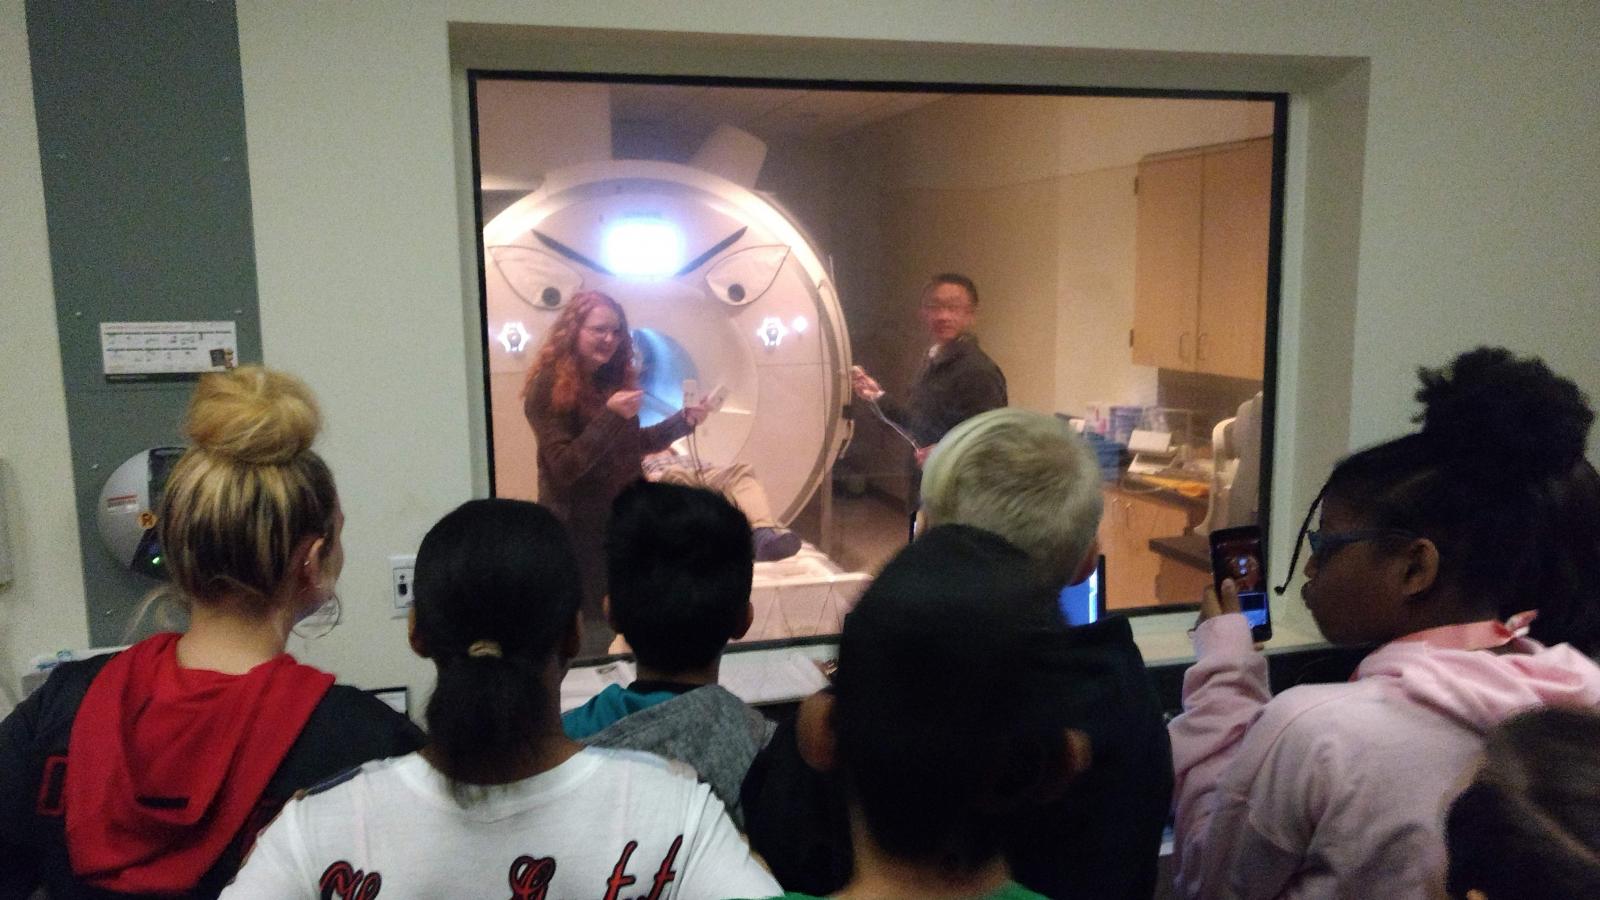 Members of the CCBBI Student Group provide an MRI demonstration and discuss brain imaging with Hilltonia 7th graders.  